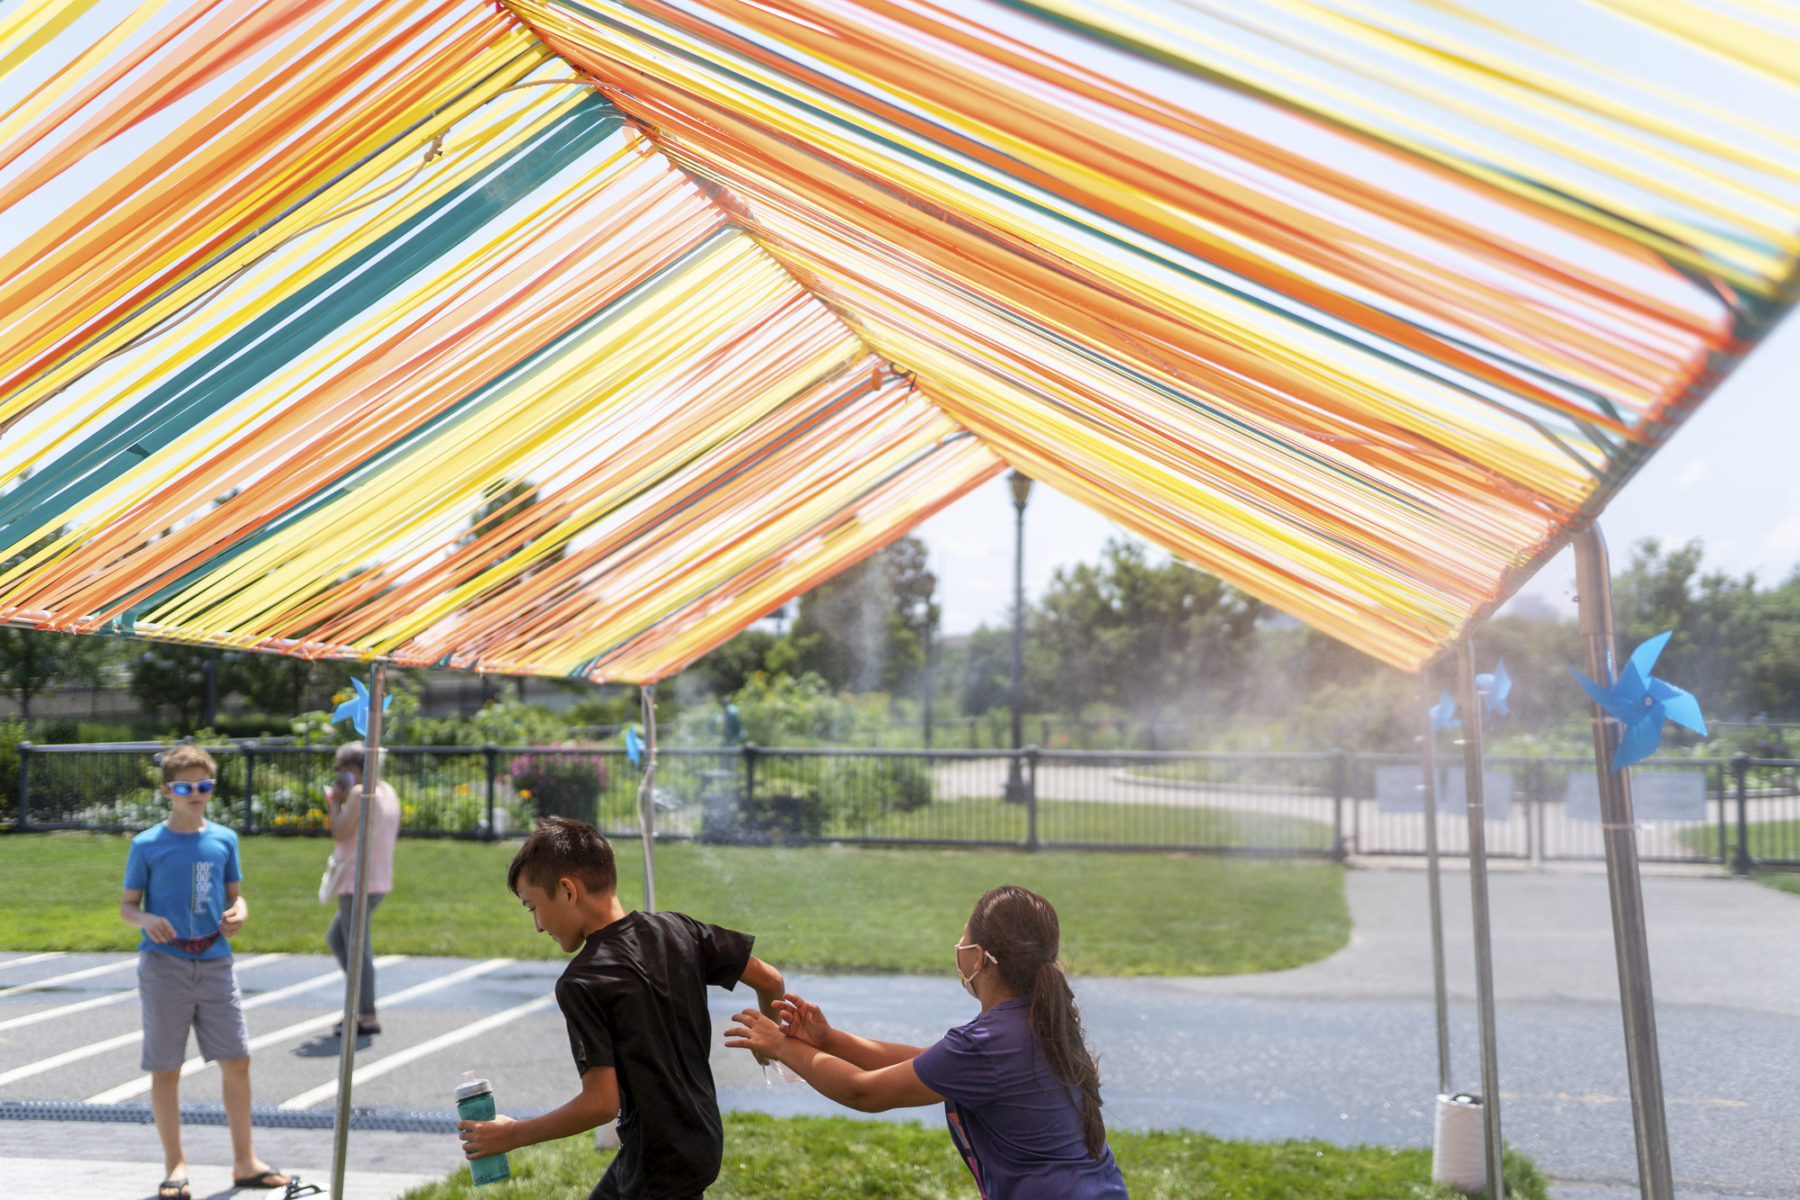 Children playing under the shade structure while it releases cooling mist